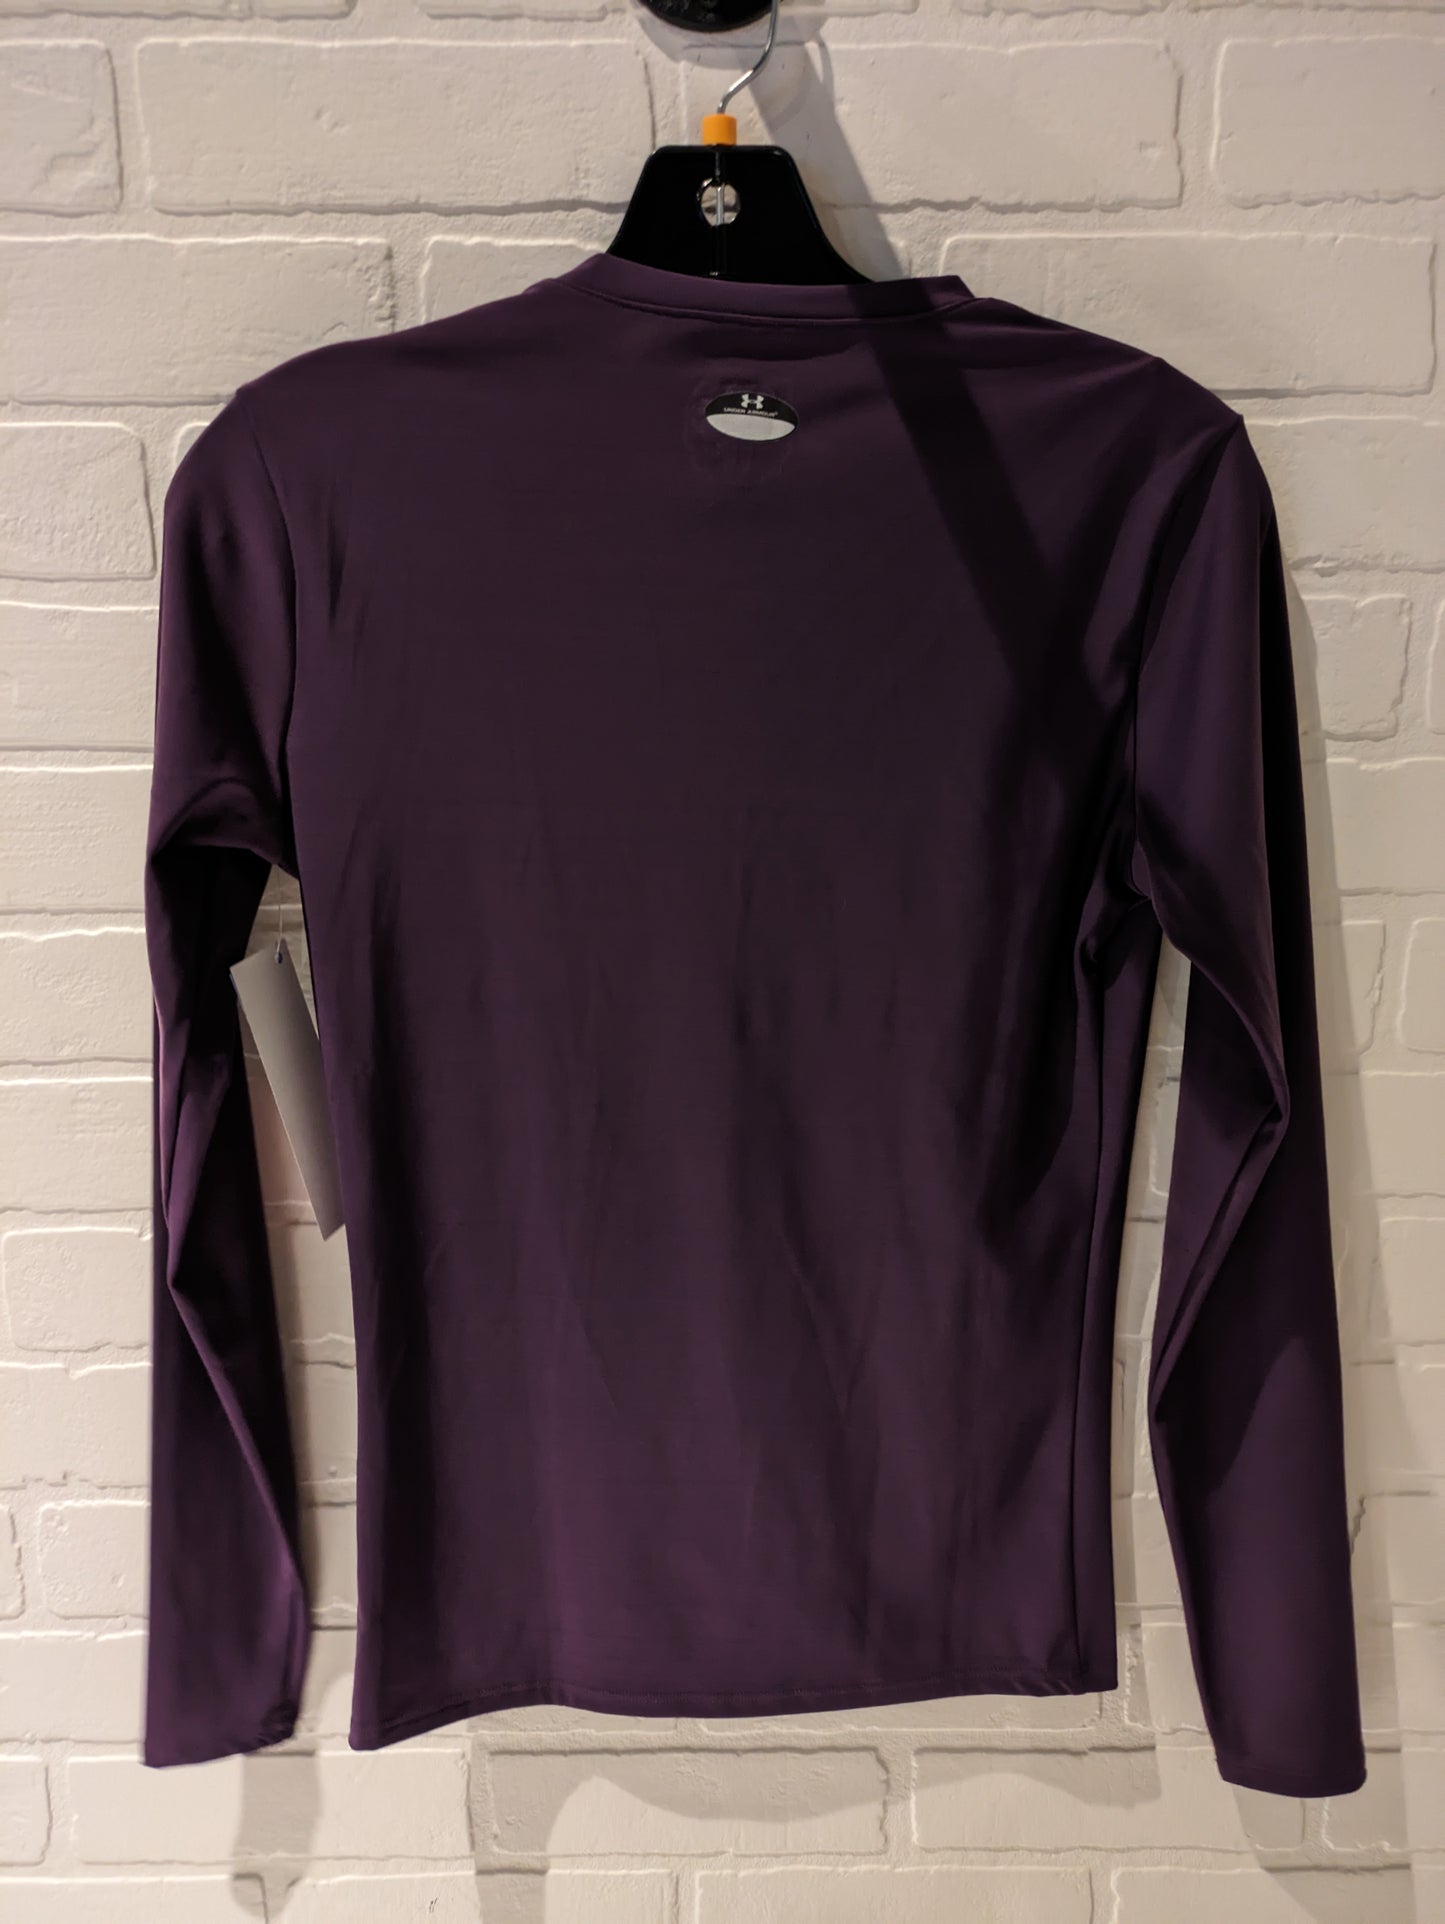 Athletic Top Long Sleeve Crewneck By Under Armour  Size: L